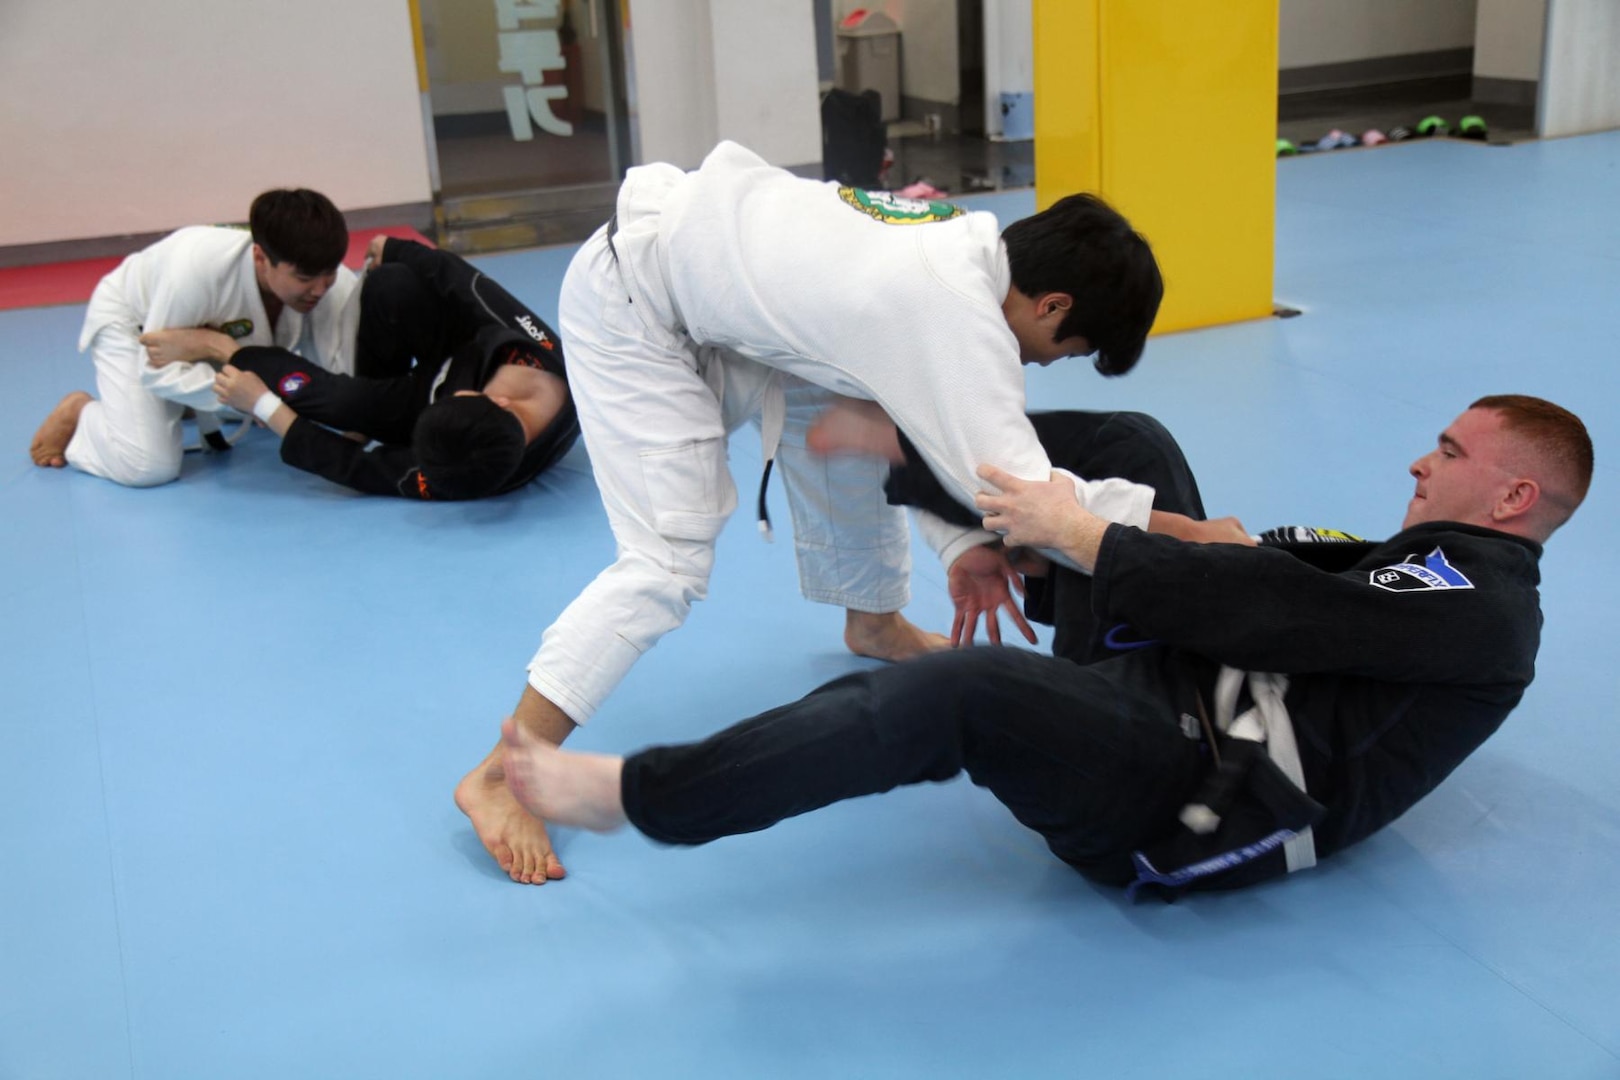 In this photo file, Pfc. Kaleb Whitten (right), an intelligence analyst with 19th Expeditionary Sustainment Command, and Onalaska, Texas native, tries to keep Ji Hoon Lee in his guard while practicing jiu jitsu at the Hoon Machado gym in Taegu, Korea, Jan. 29.